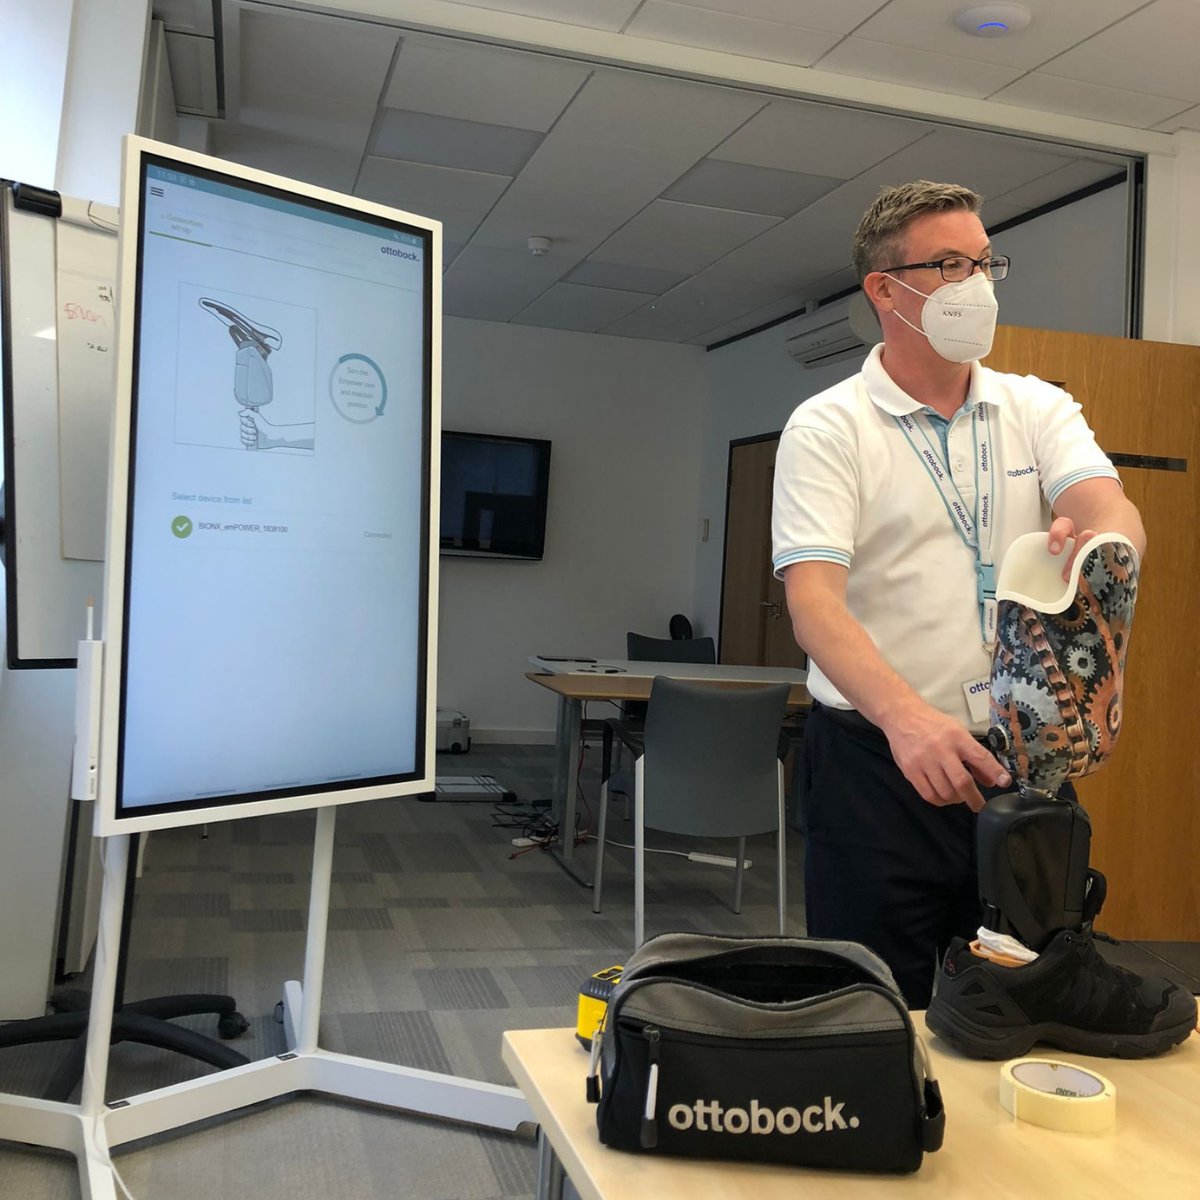 Here is our Academy Prosthetist Alastair during a recent Empower training session. Alastair is part of our Academy Team who work with other prosthetist all over the UK #PandOday2021